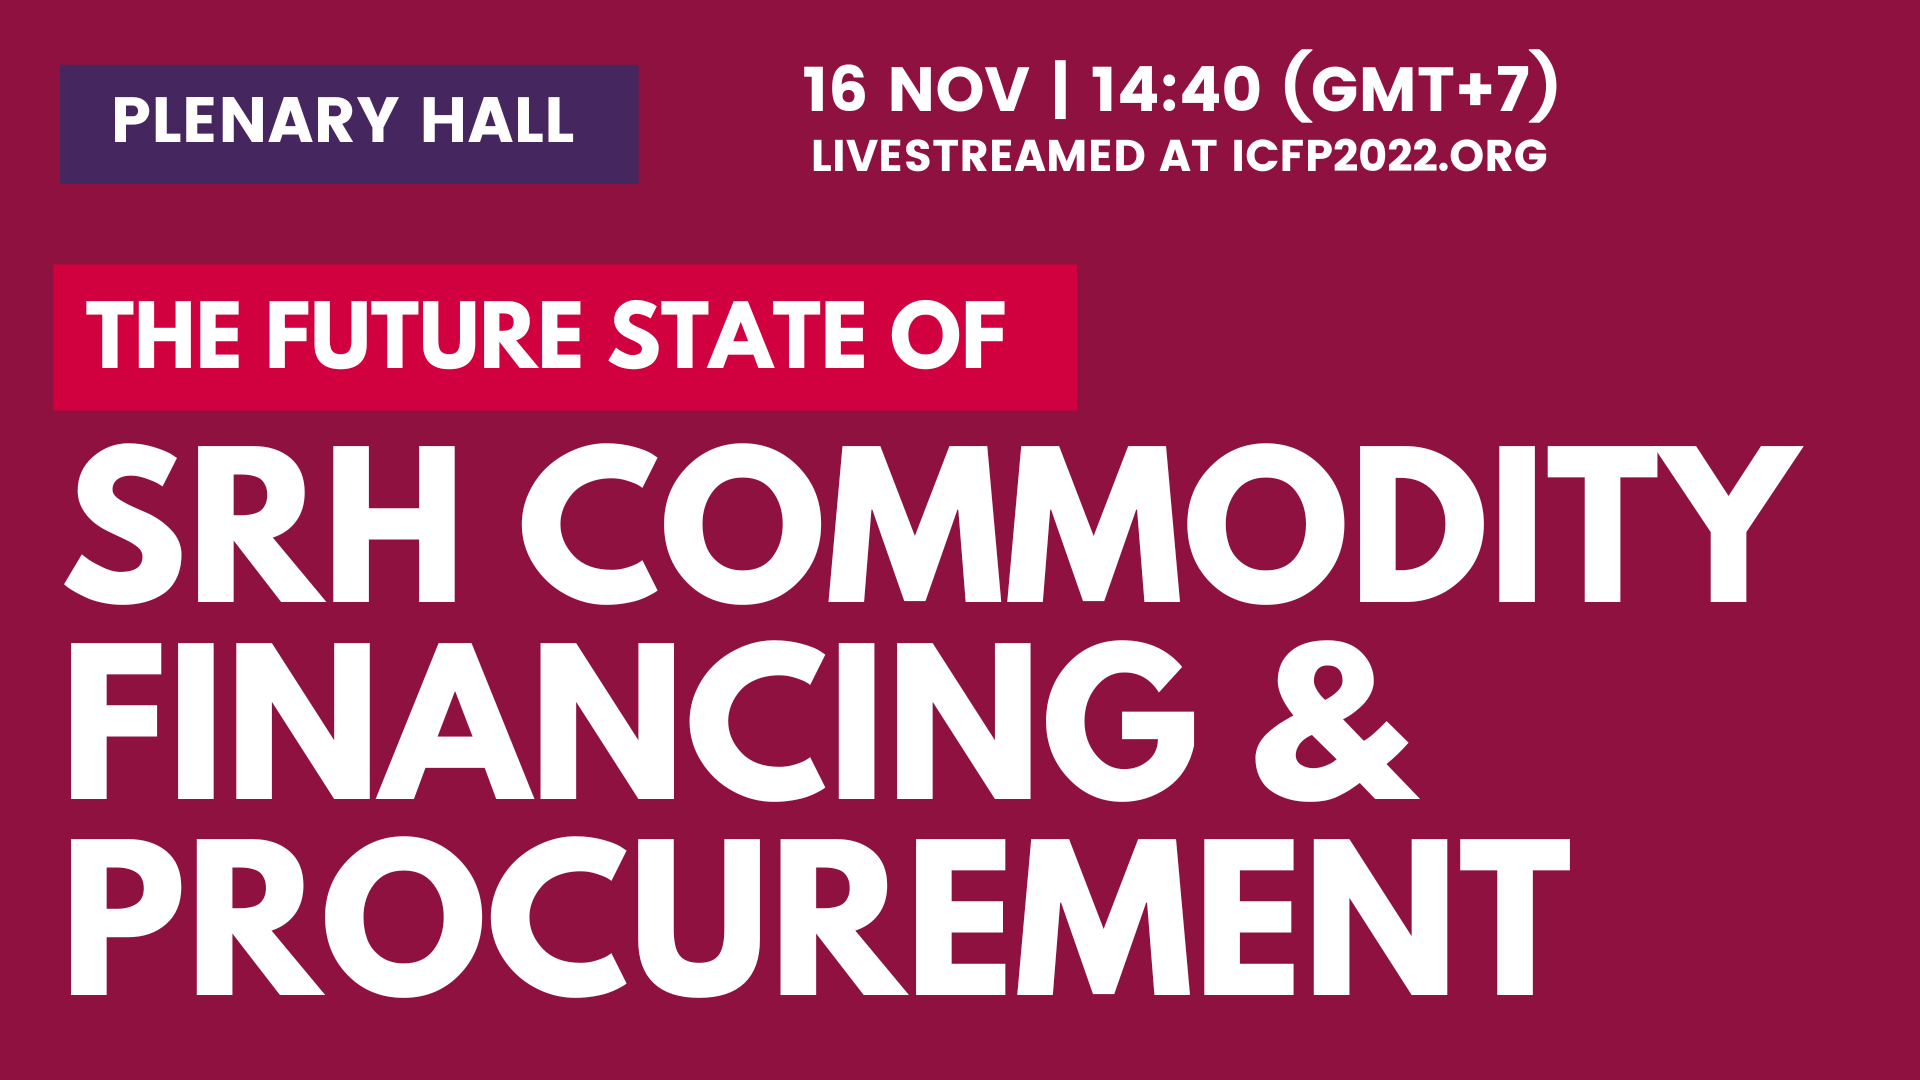 The Future State of SRH Commodity Financing & Procurement